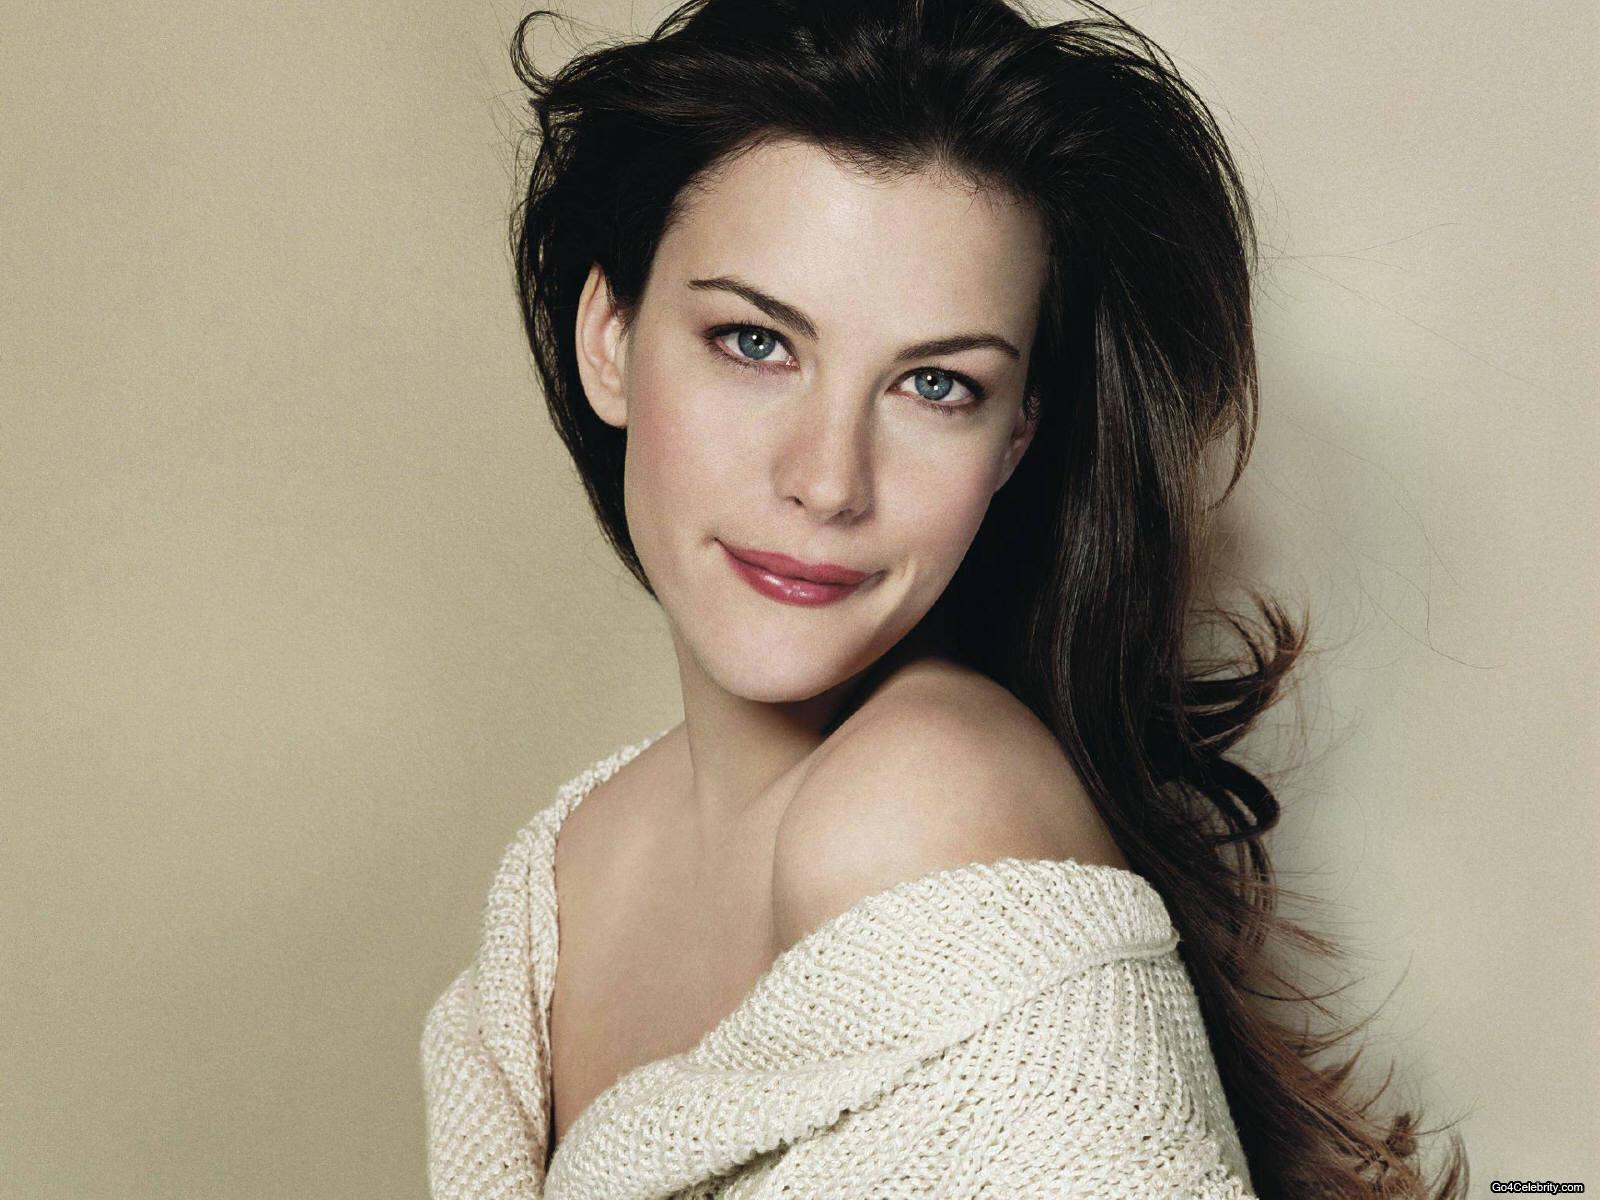 Liv Tyler Wallpapers High Resolution and Quality Download